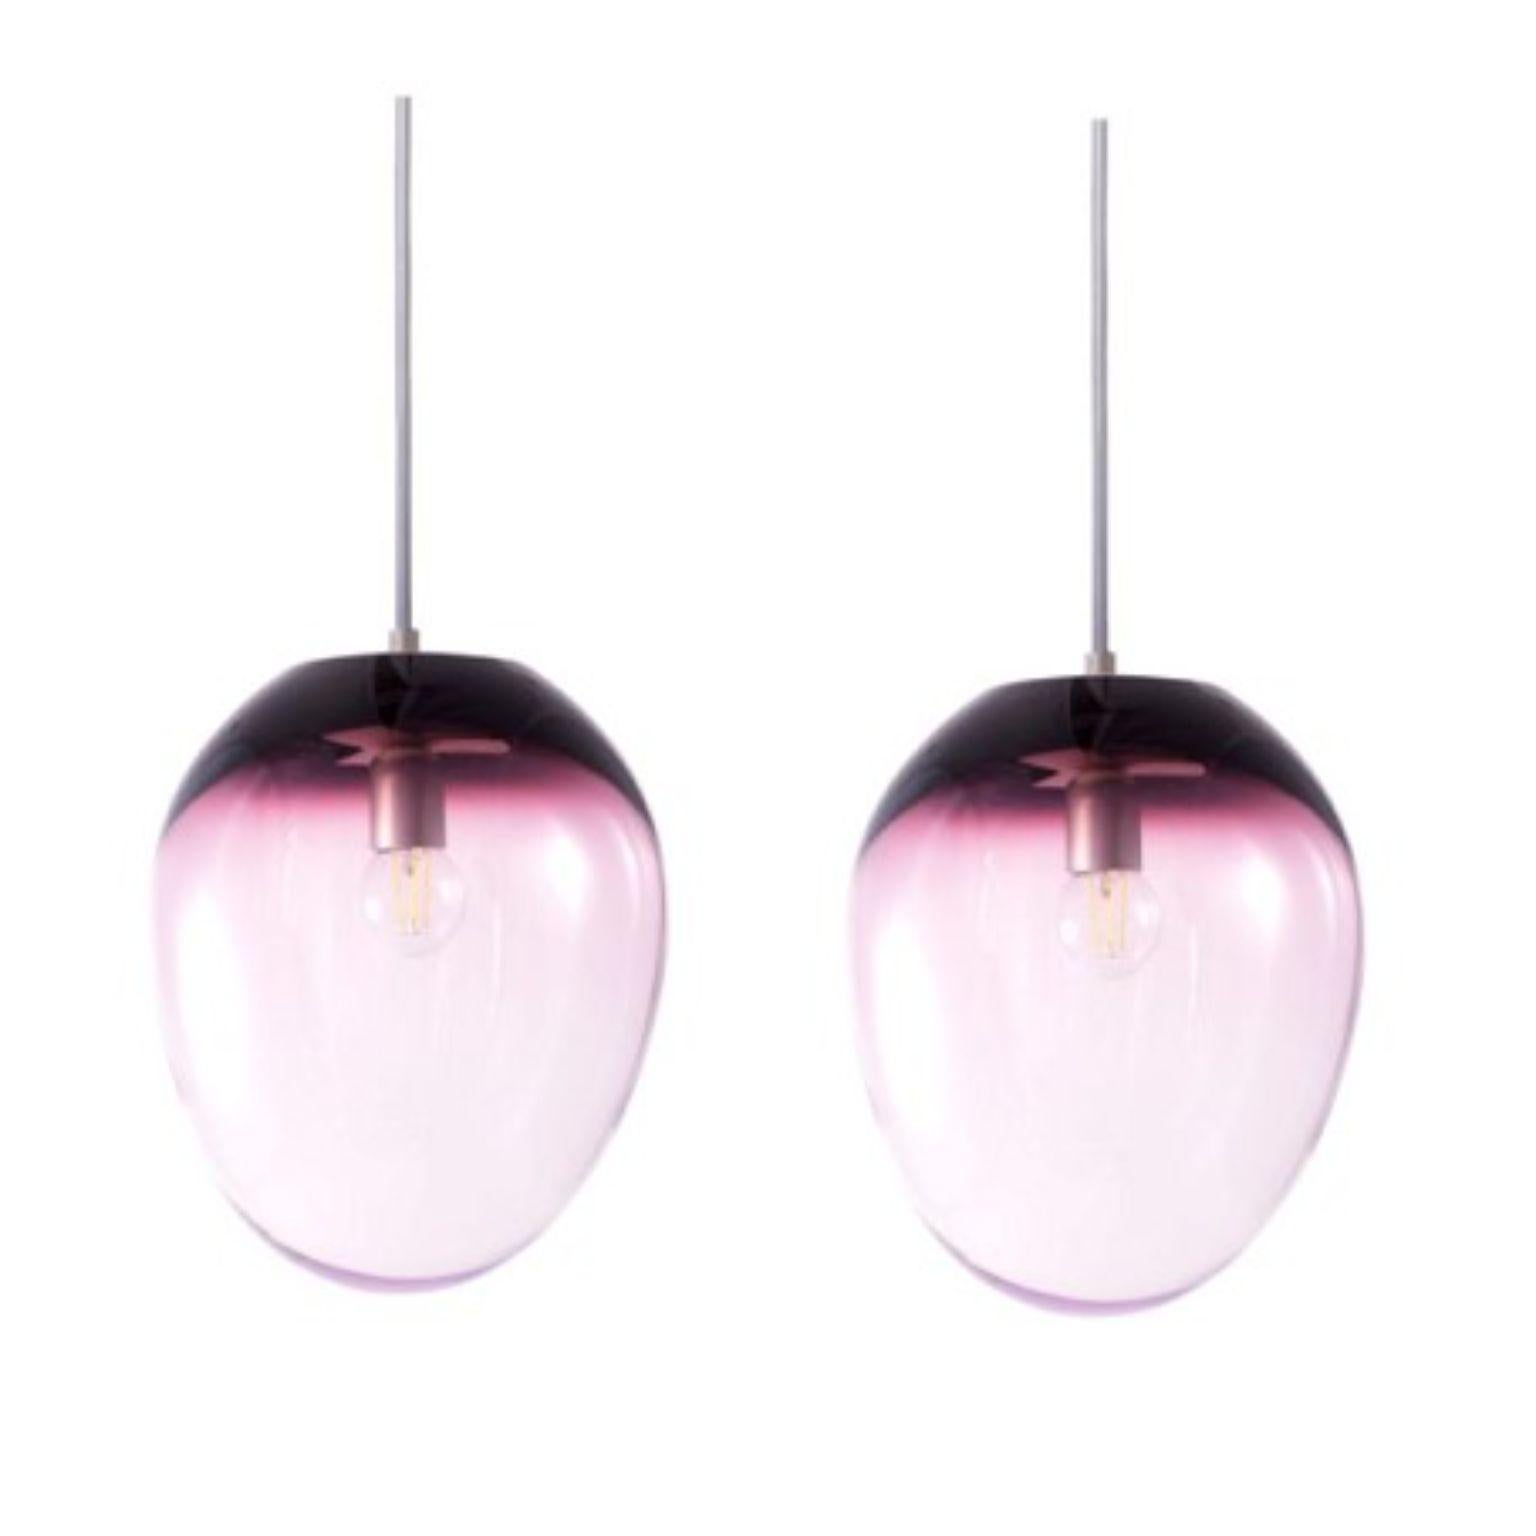 Set of 2 Planetoide Astrea Purple Iridescent pendants by Eloa.
No UL listed 
Material: Glass,Steel,Silver, LED Bulb
Dimensions: D30 x W30 x H250 cm
Also Available in different colours and dimensions.

All our lamps can be wired according to each